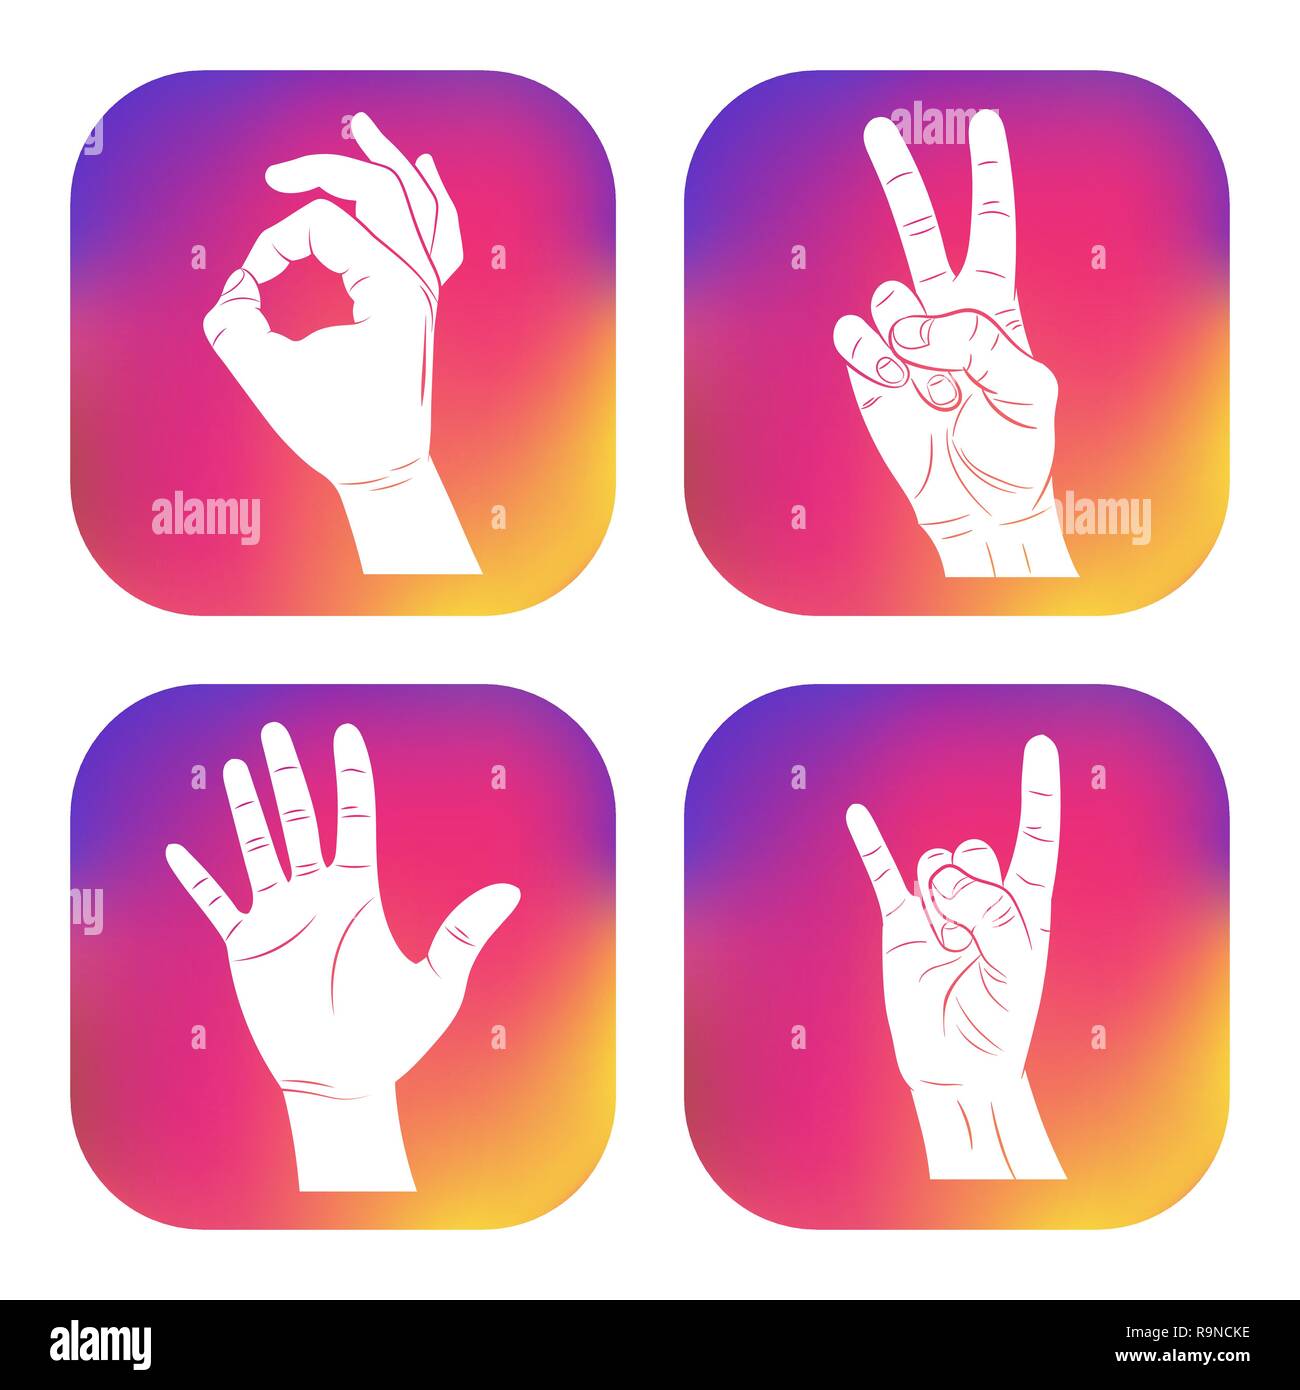 Premium Vector  Hand gesture emojis icons collection. handshake, biceps,  applause, thumb, peace, rock on, ok, folder hands gesturing. set of  different emoticon hands isolated illustration.